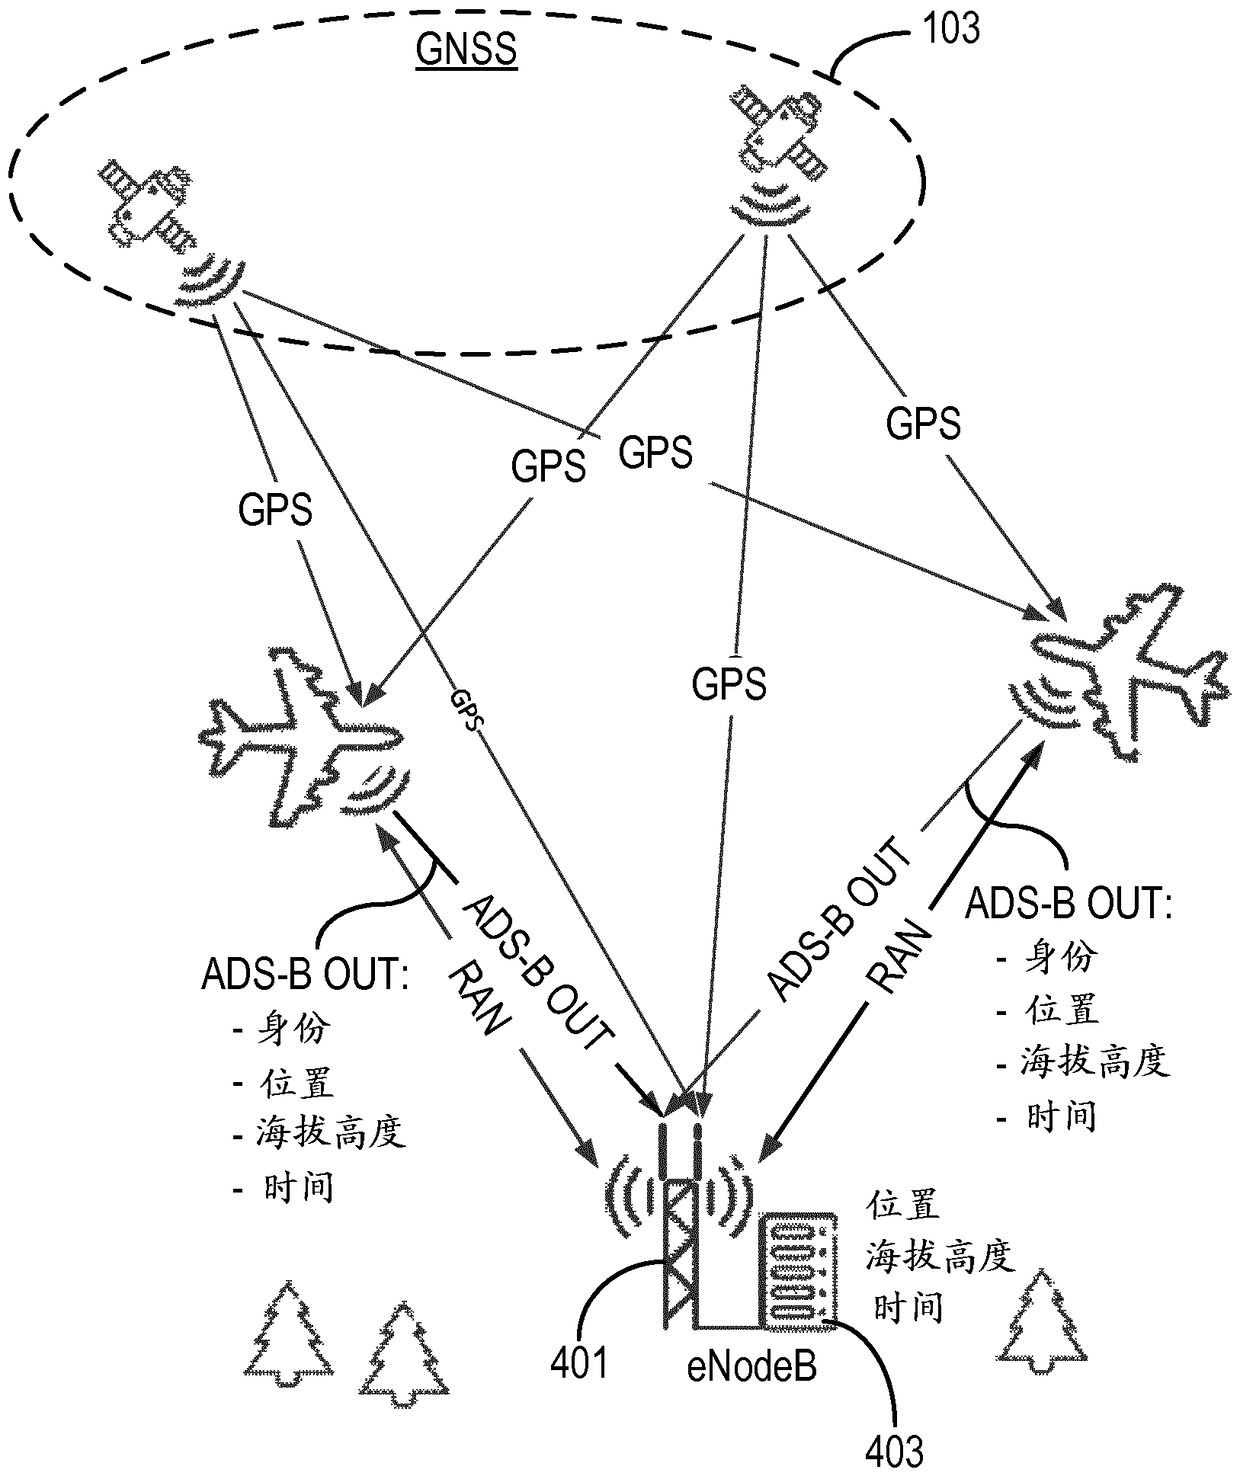 In-flight cellular communications system coverage of mobile communications equipment located in aircraft